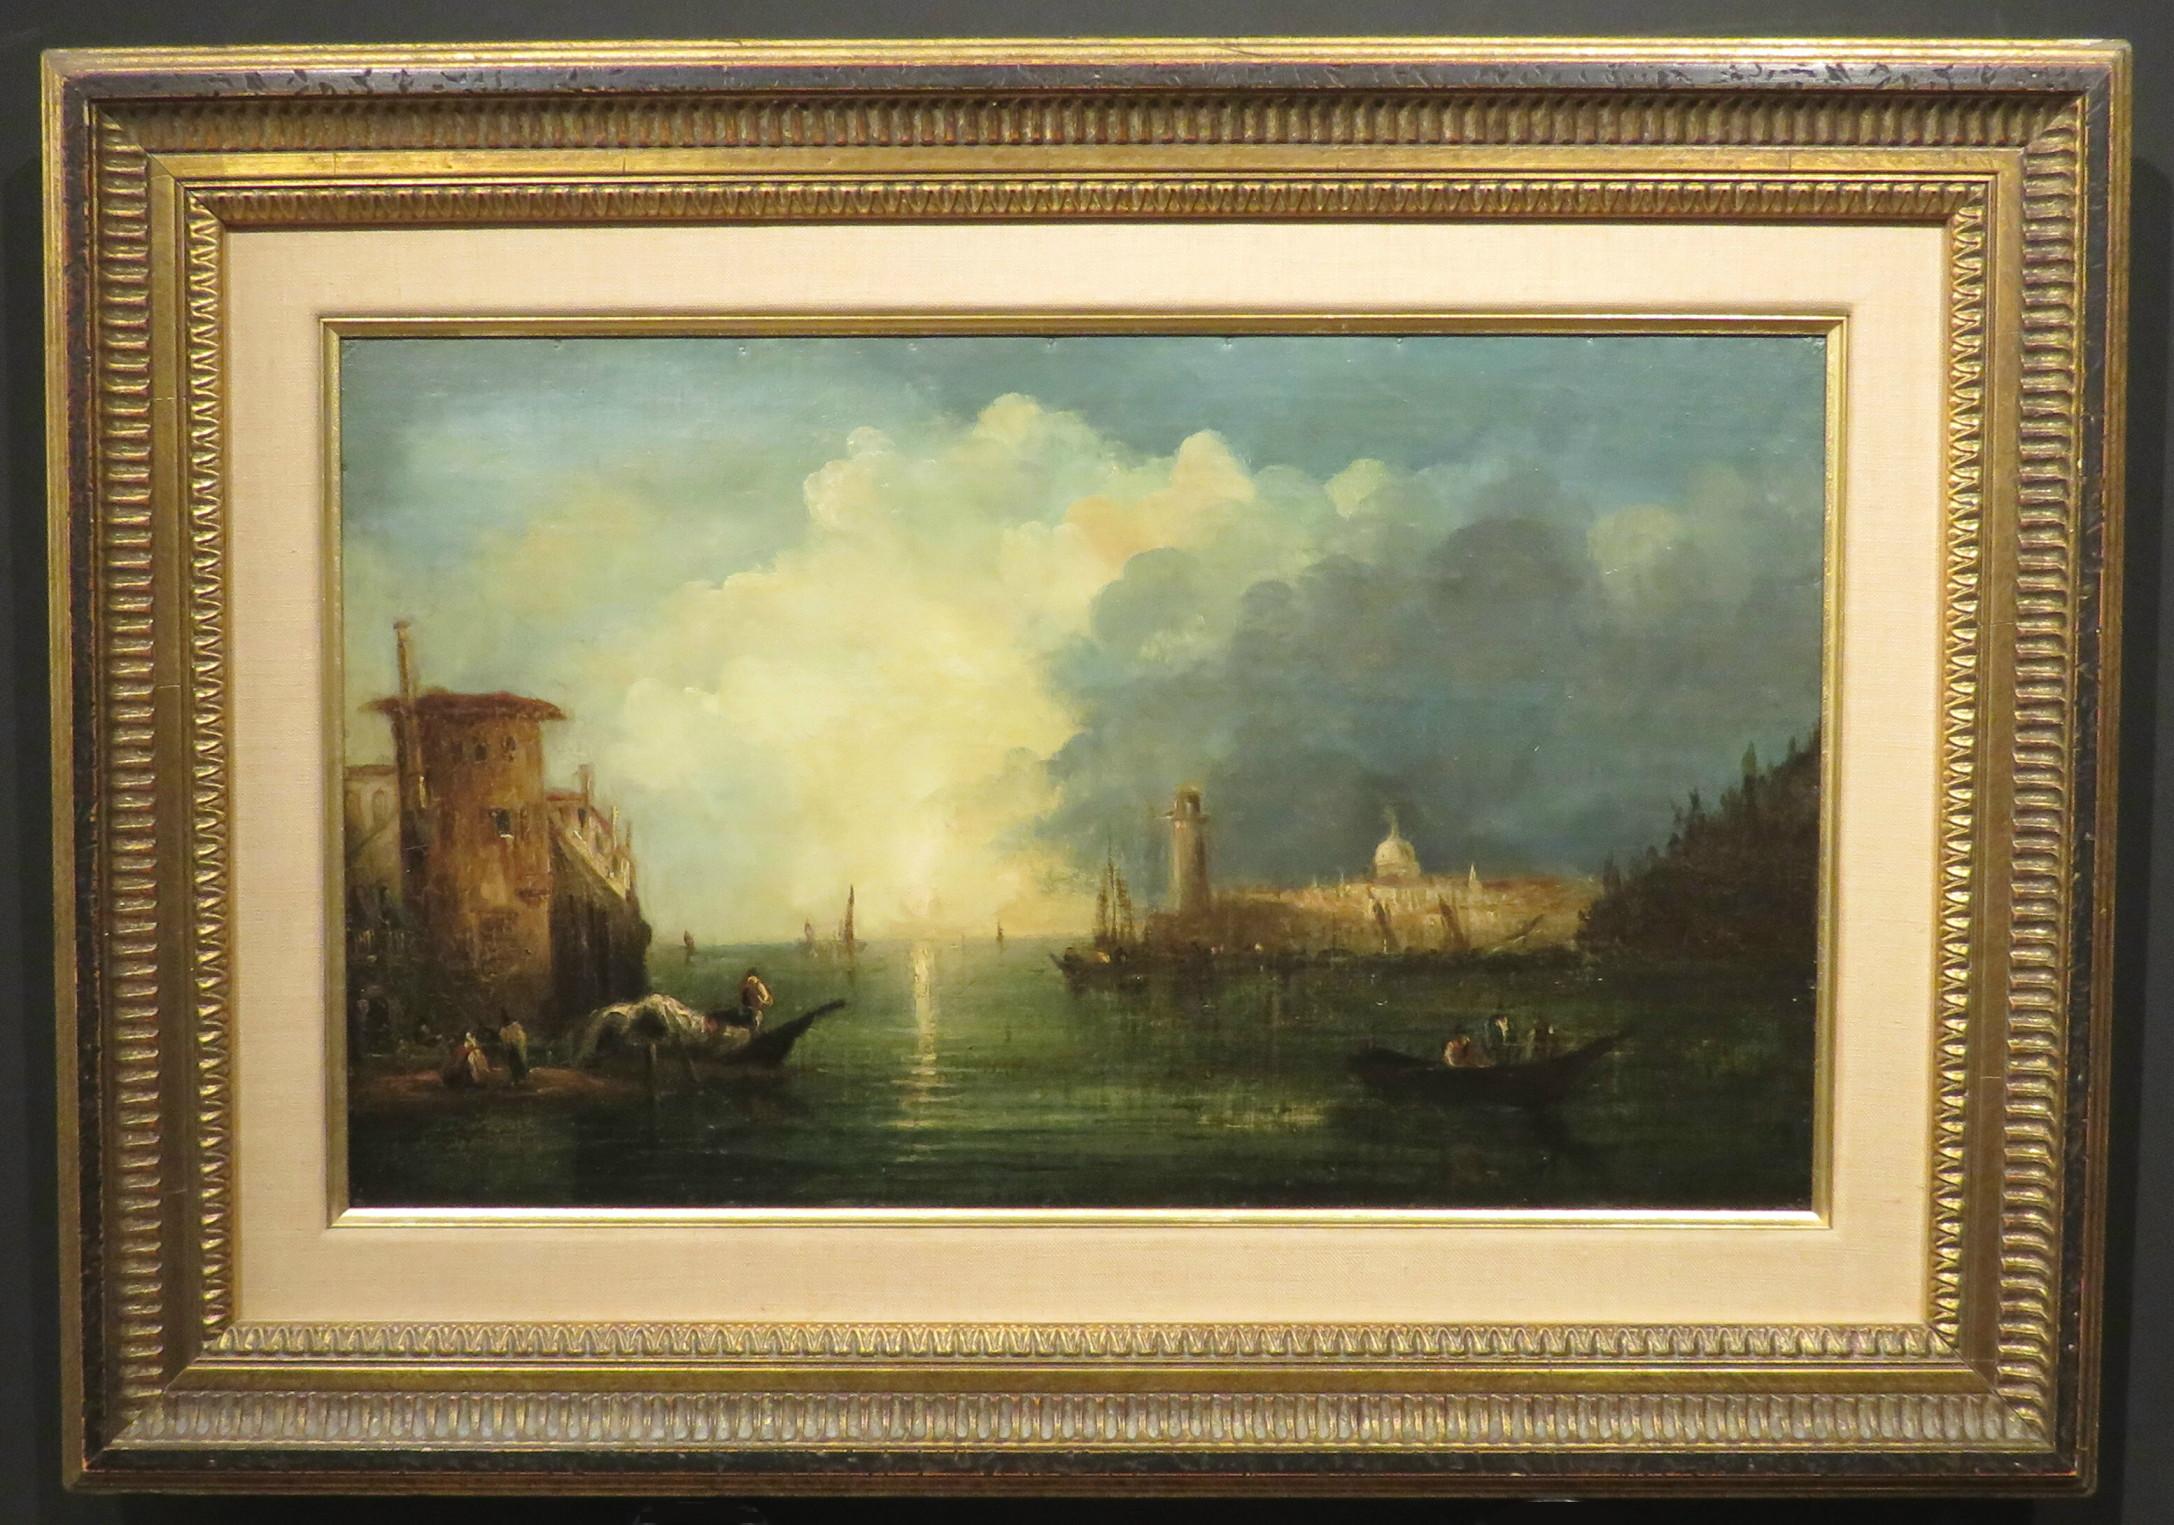 A highly atmospheric work depicting merchant vessels on the banks of what appears to be the Grand Canal in Venice.
18th Century Italian School, spuriously signed Canaletto bottom right and dated 1736. 
Oil on canvas, nailed onto board and backed